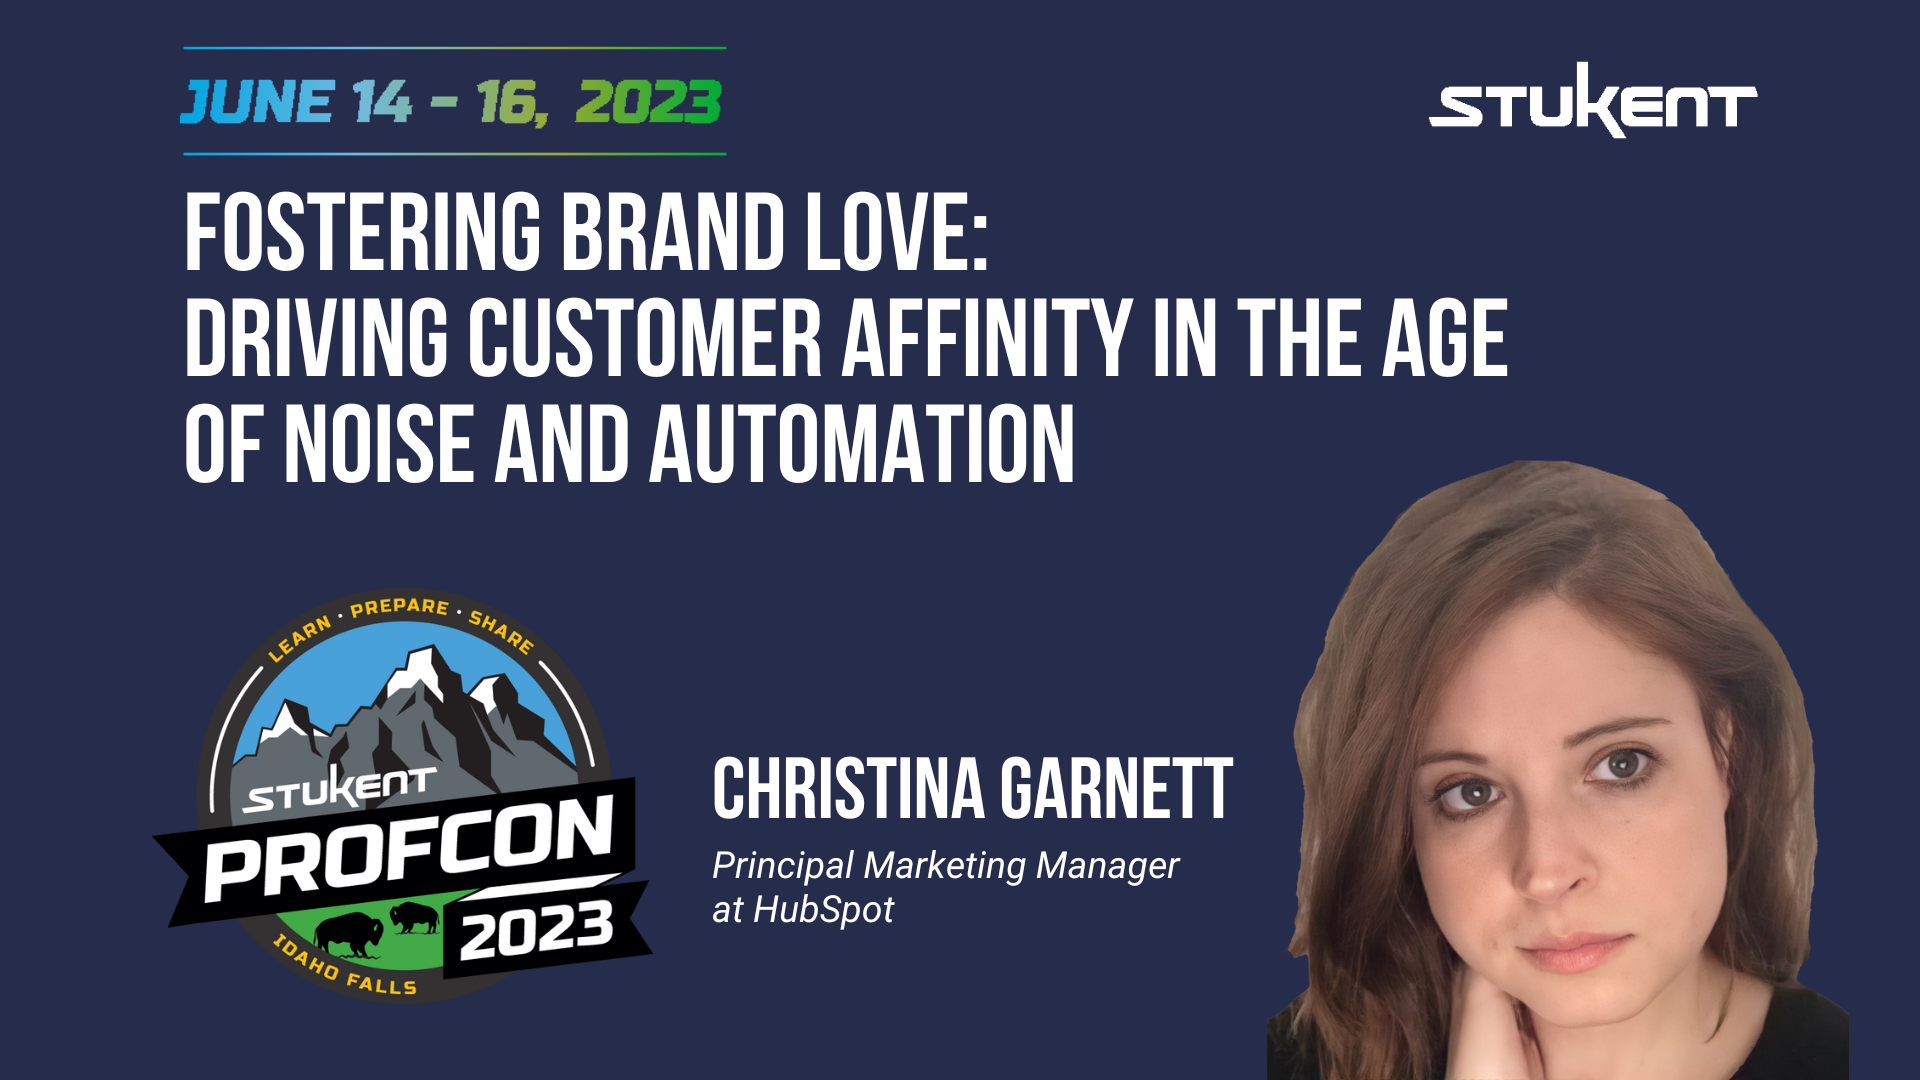 Fostering Brand Love: Driving Customer Affinity in the Age of Noise and Automation